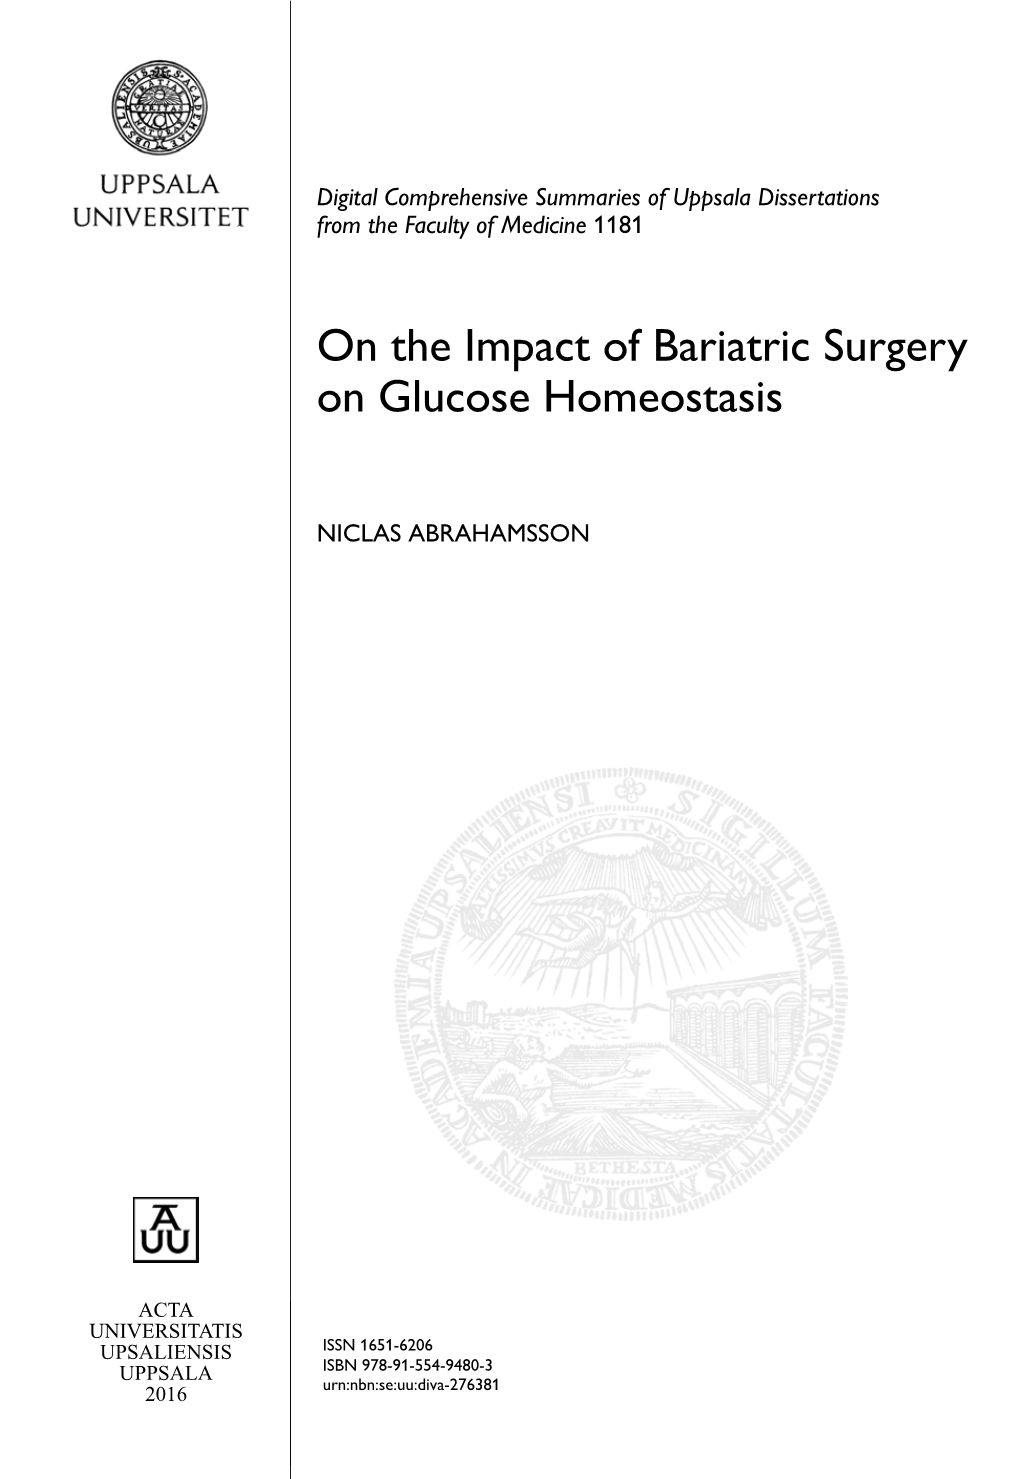 On the Impact of Bariatric Surgery on Glucose Homeostasis